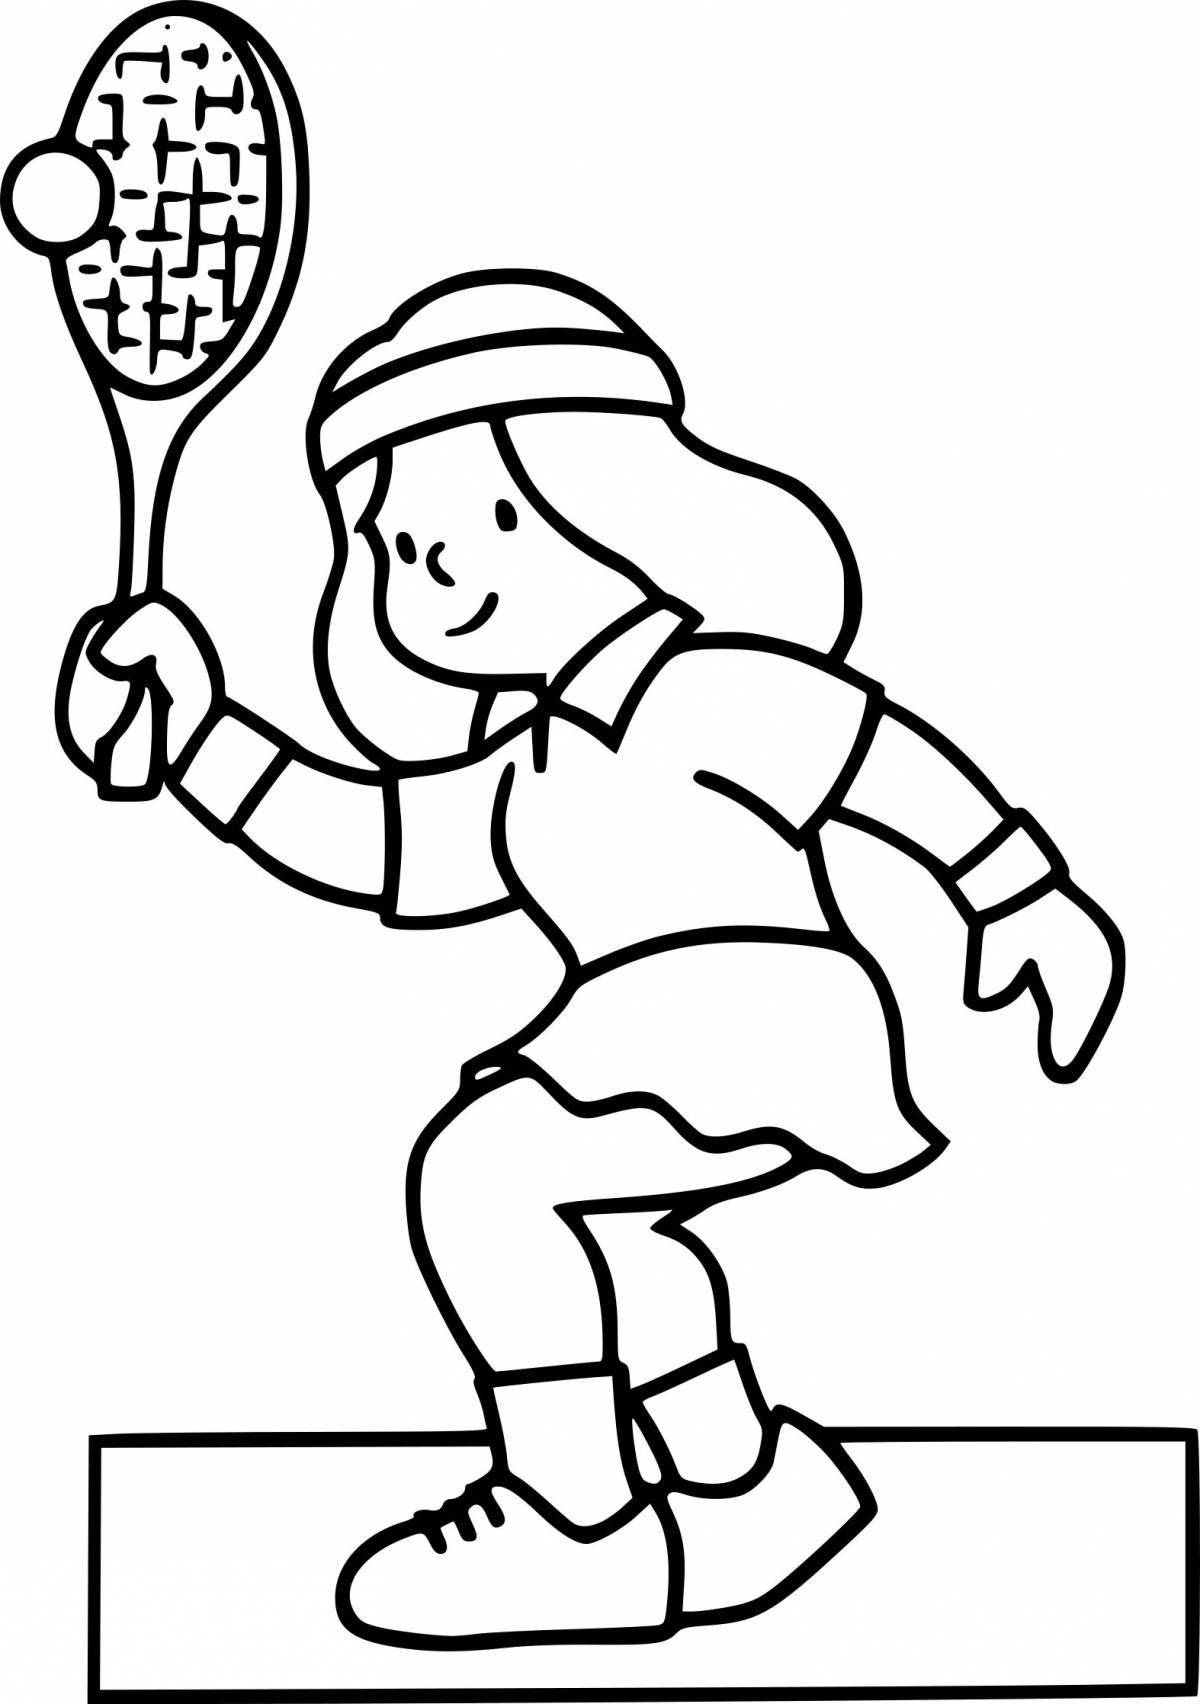 Attractive sports coloring book for 4-5 year olds